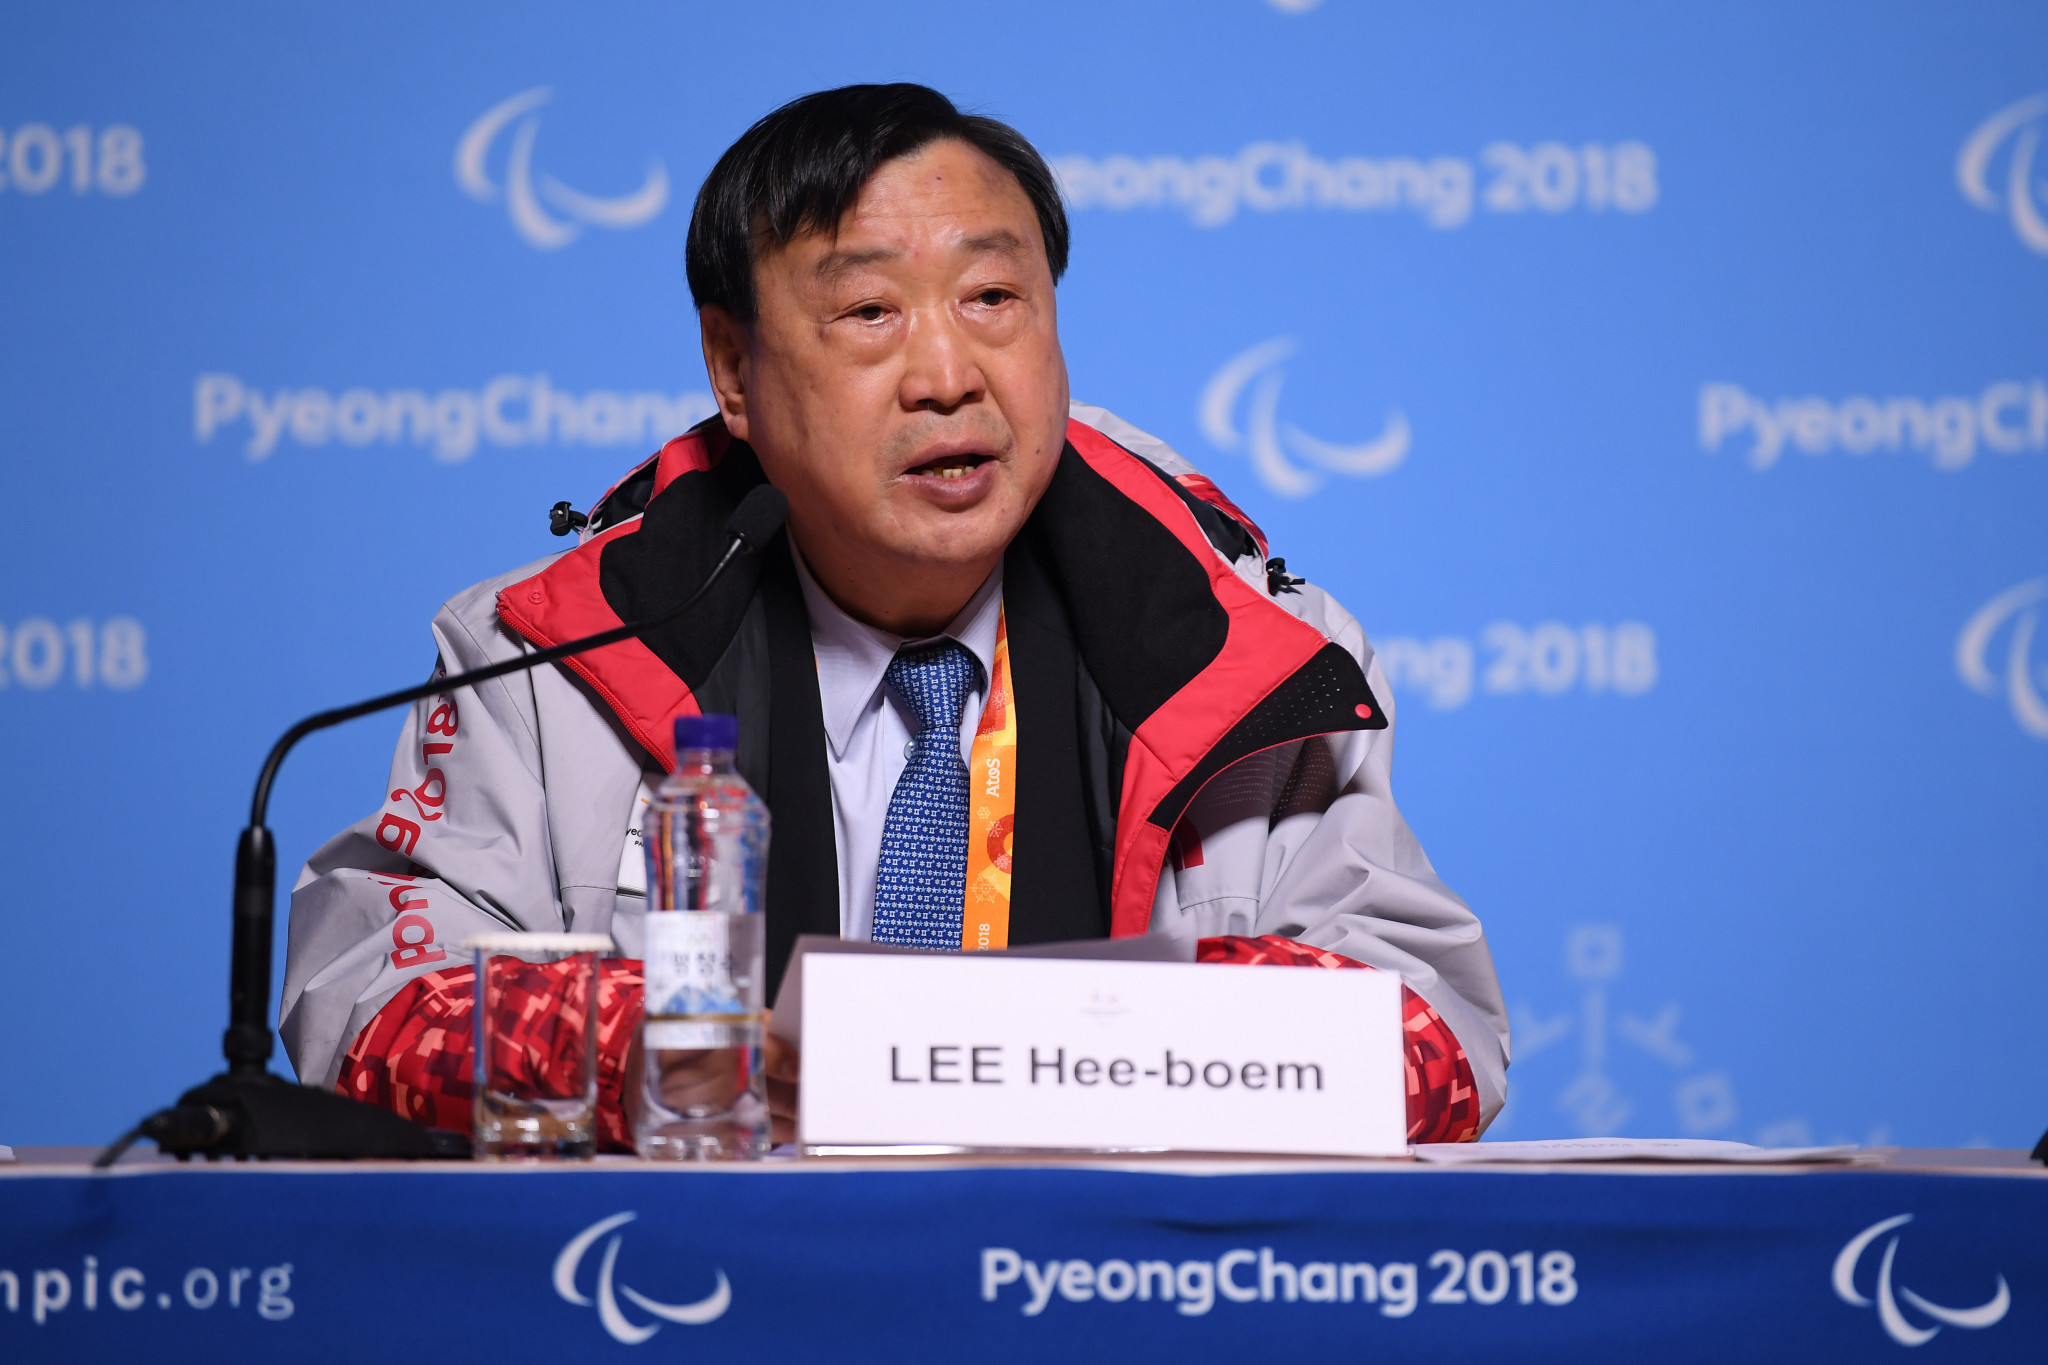 Pyeongchang 2018 President Lee Hee-beom has said he feels "very proud" that progress is being made in talks between North and South Korea in the aftermath of last month’s Winter Olympic Games ©Getty Images